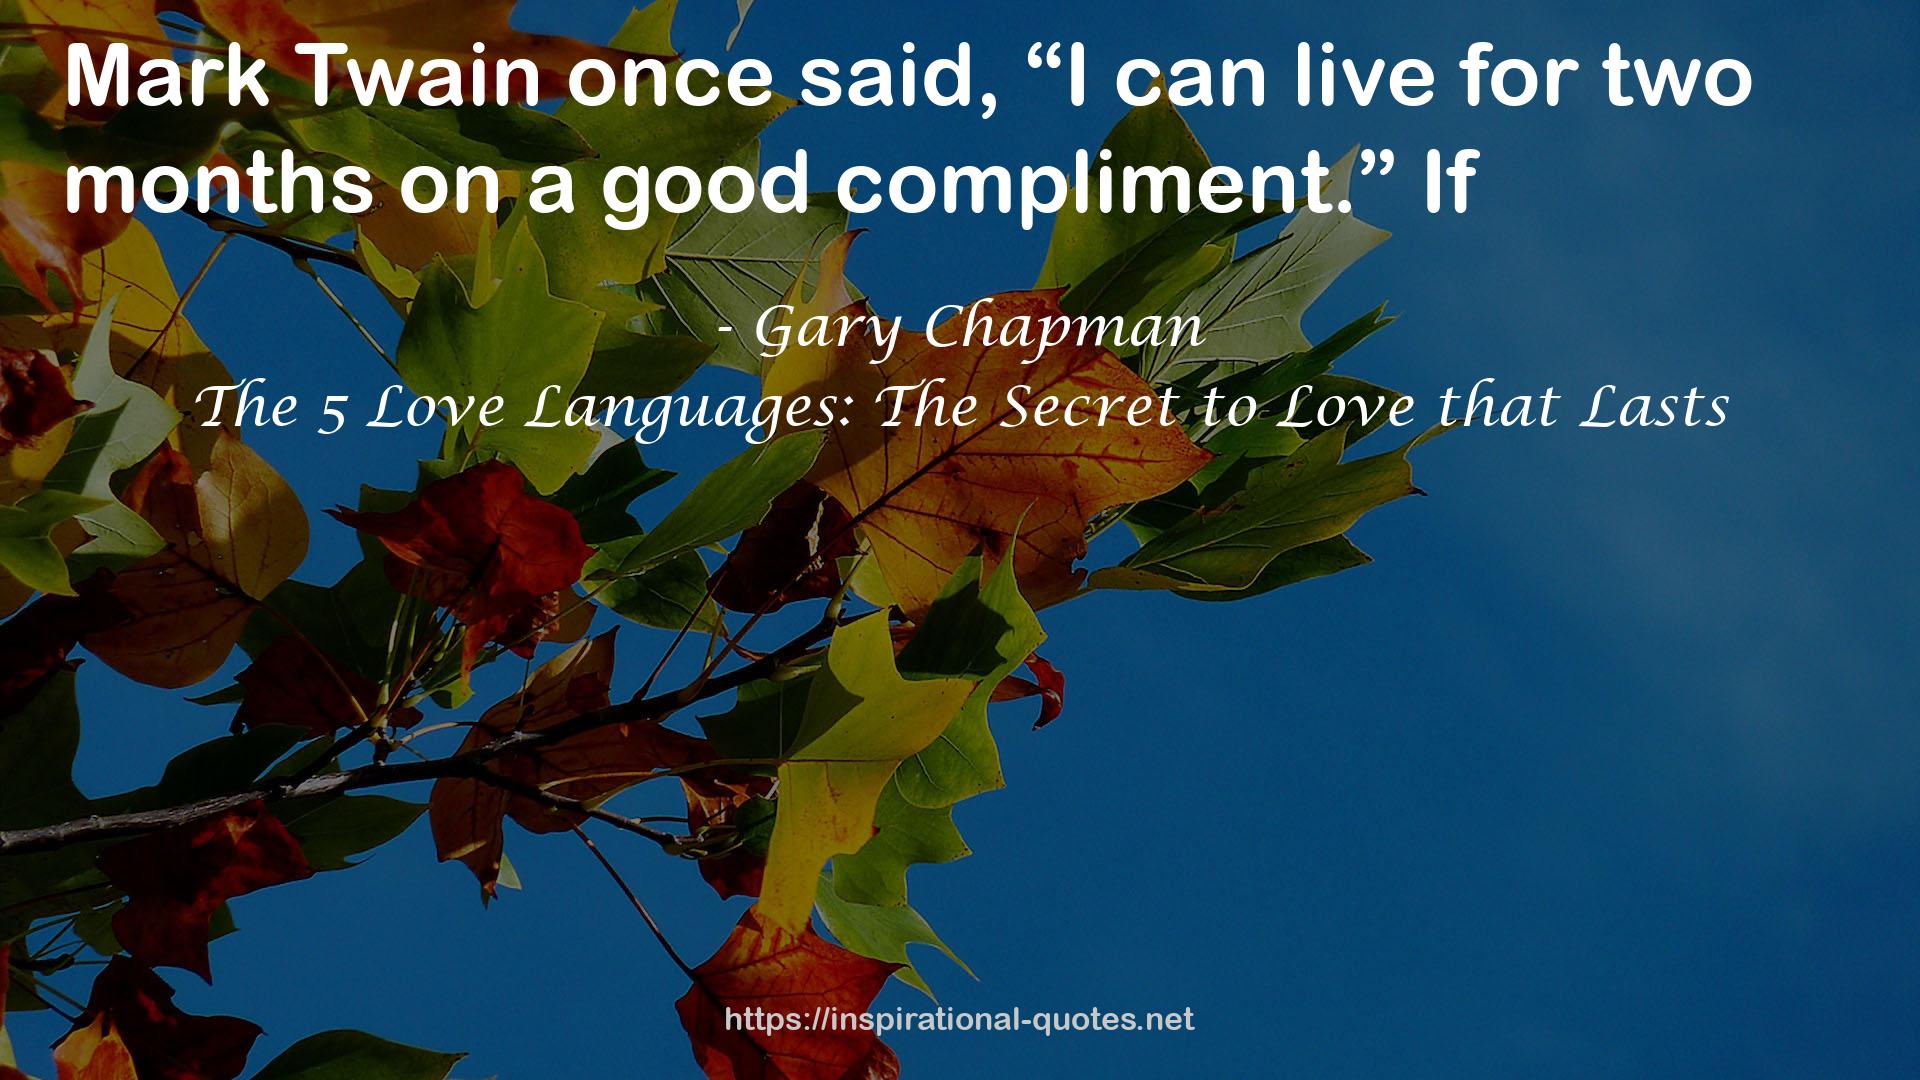 The 5 Love Languages: The Secret to Love that Lasts QUOTES